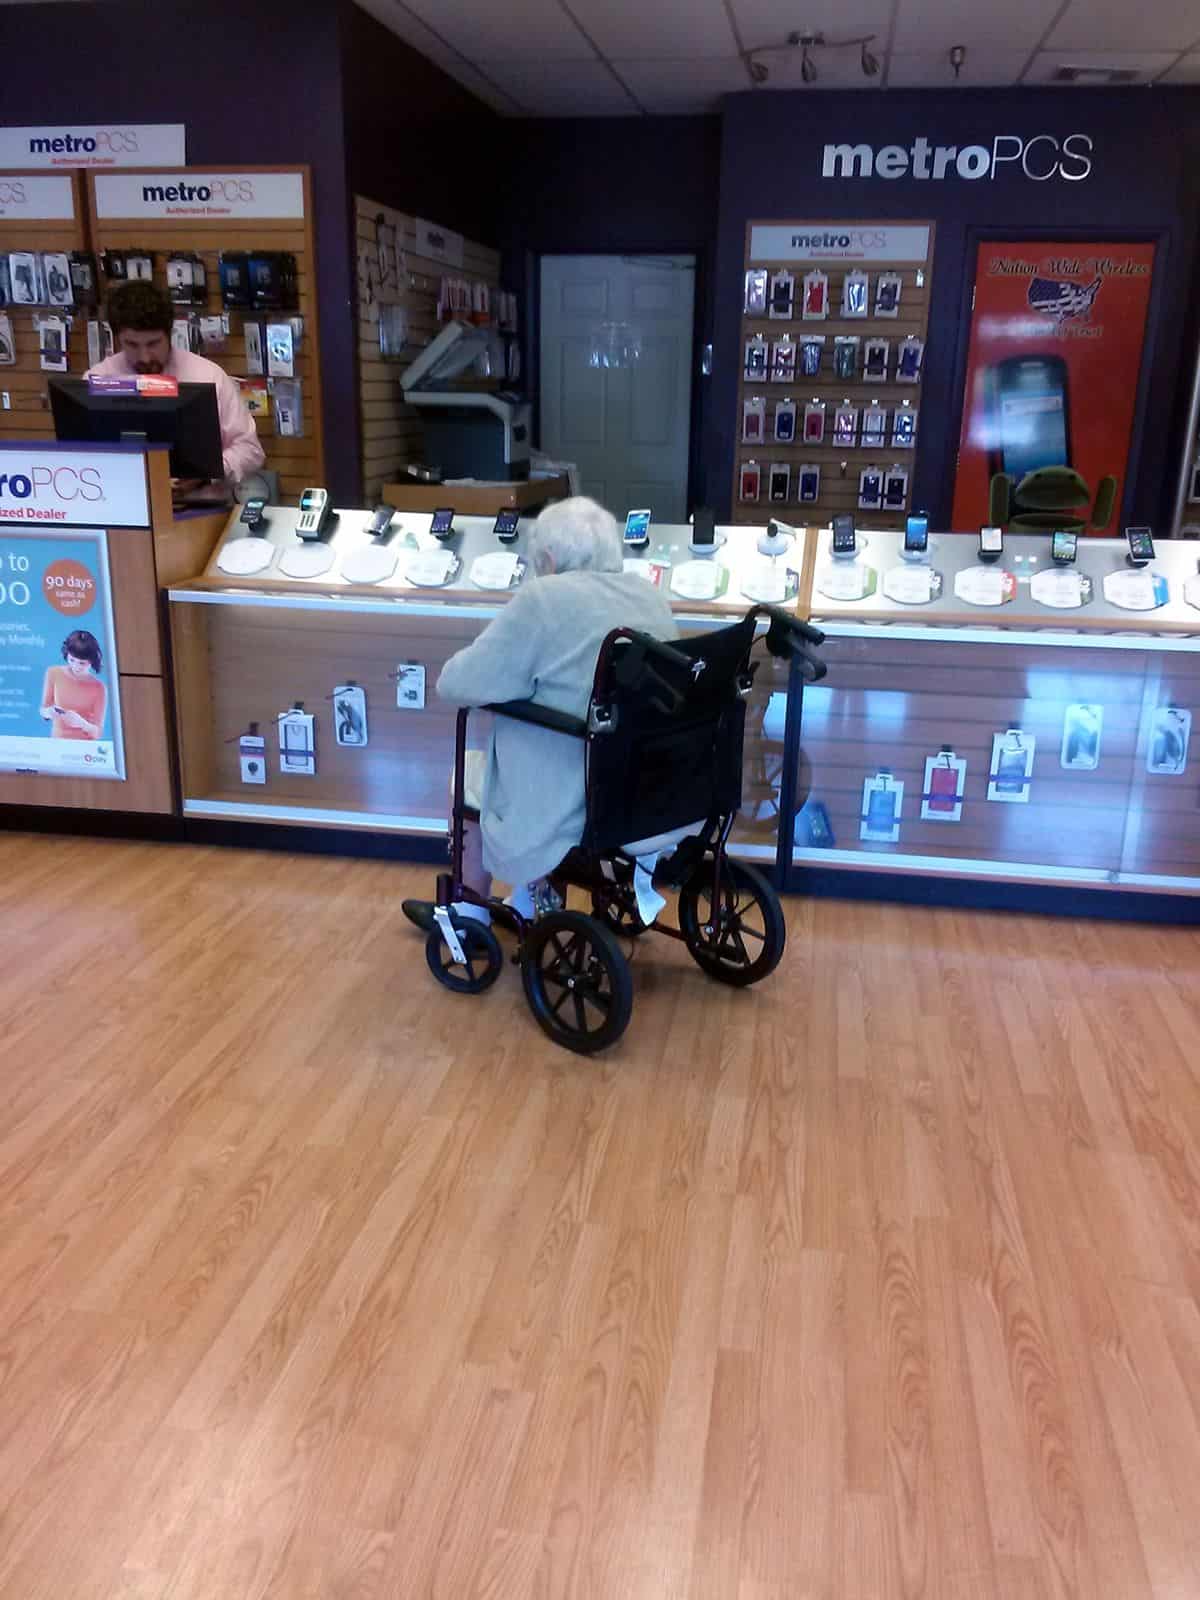 A senior citizen in a wheelchair chooses between several smartphones to purchase.